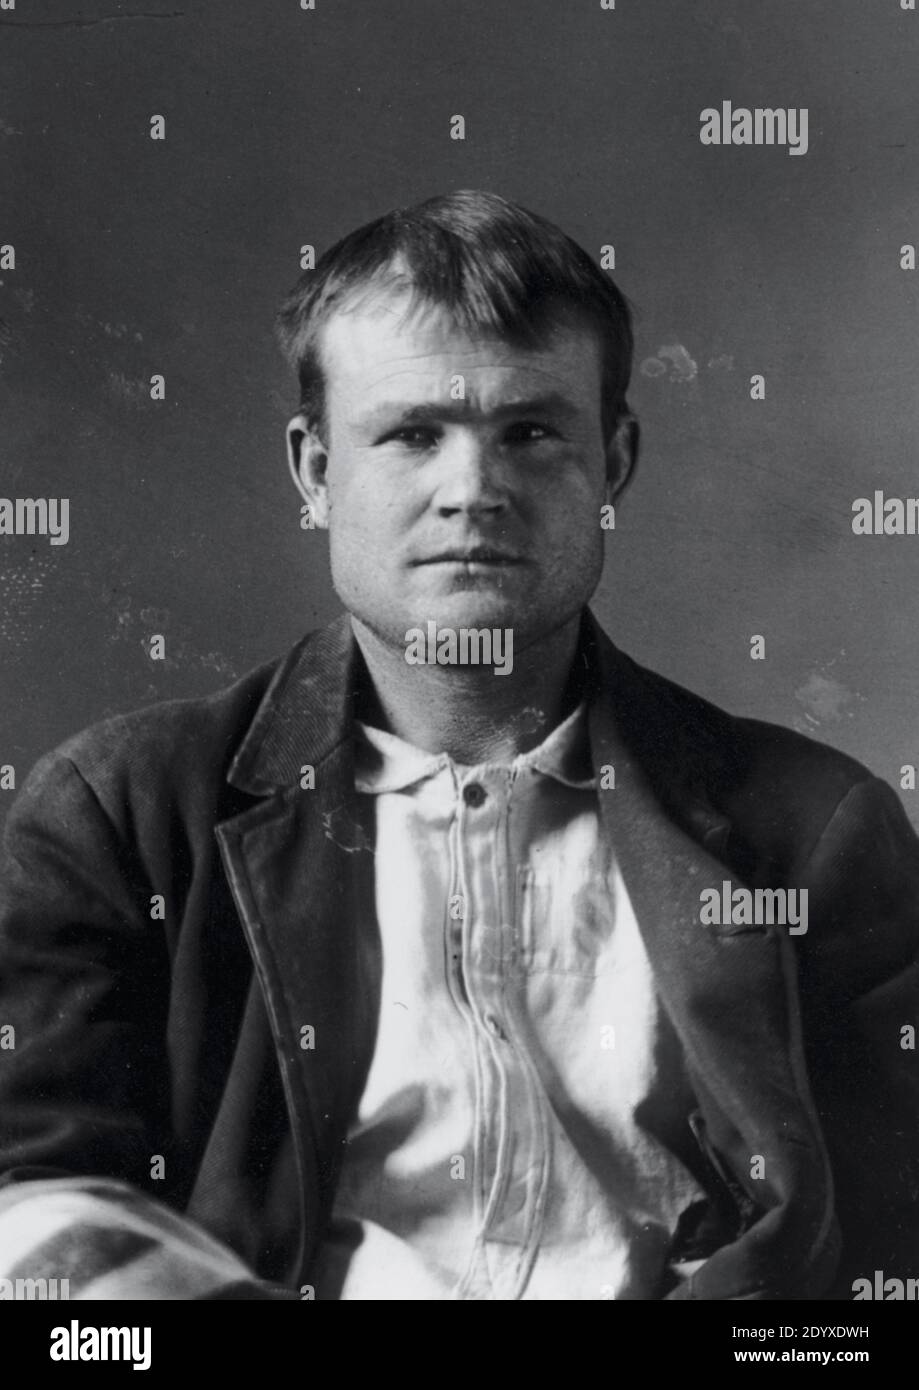 Vintage photo of the notorious American outlaw Butch Cassidy (1866 - c1908), real name Robert LeRoy Parker. Stock Photo